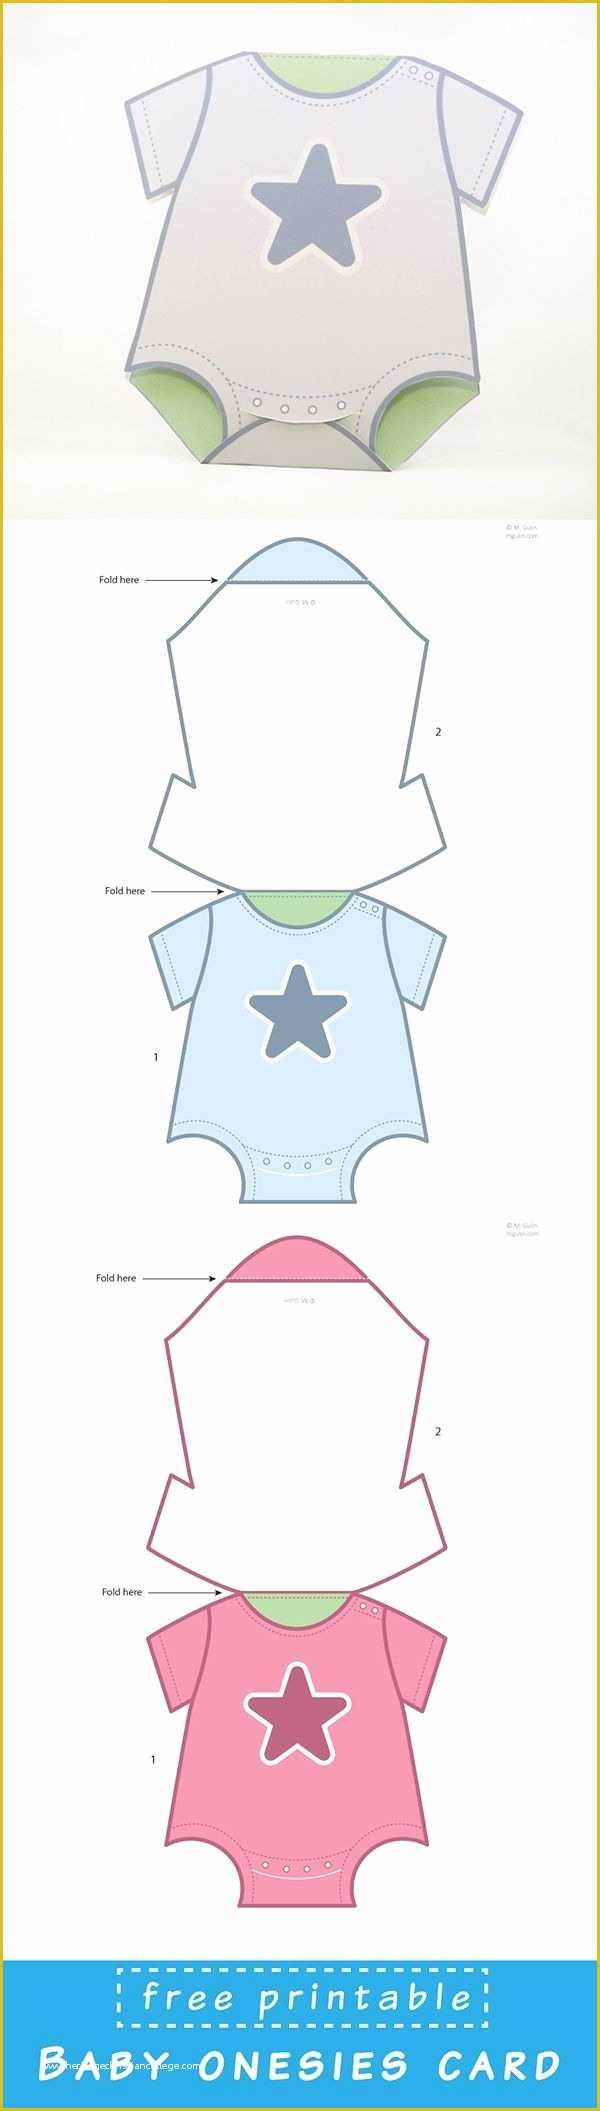 Free Printable Baby Cards Templates Of Free Printable Baby Esies Card Template Just Dowload